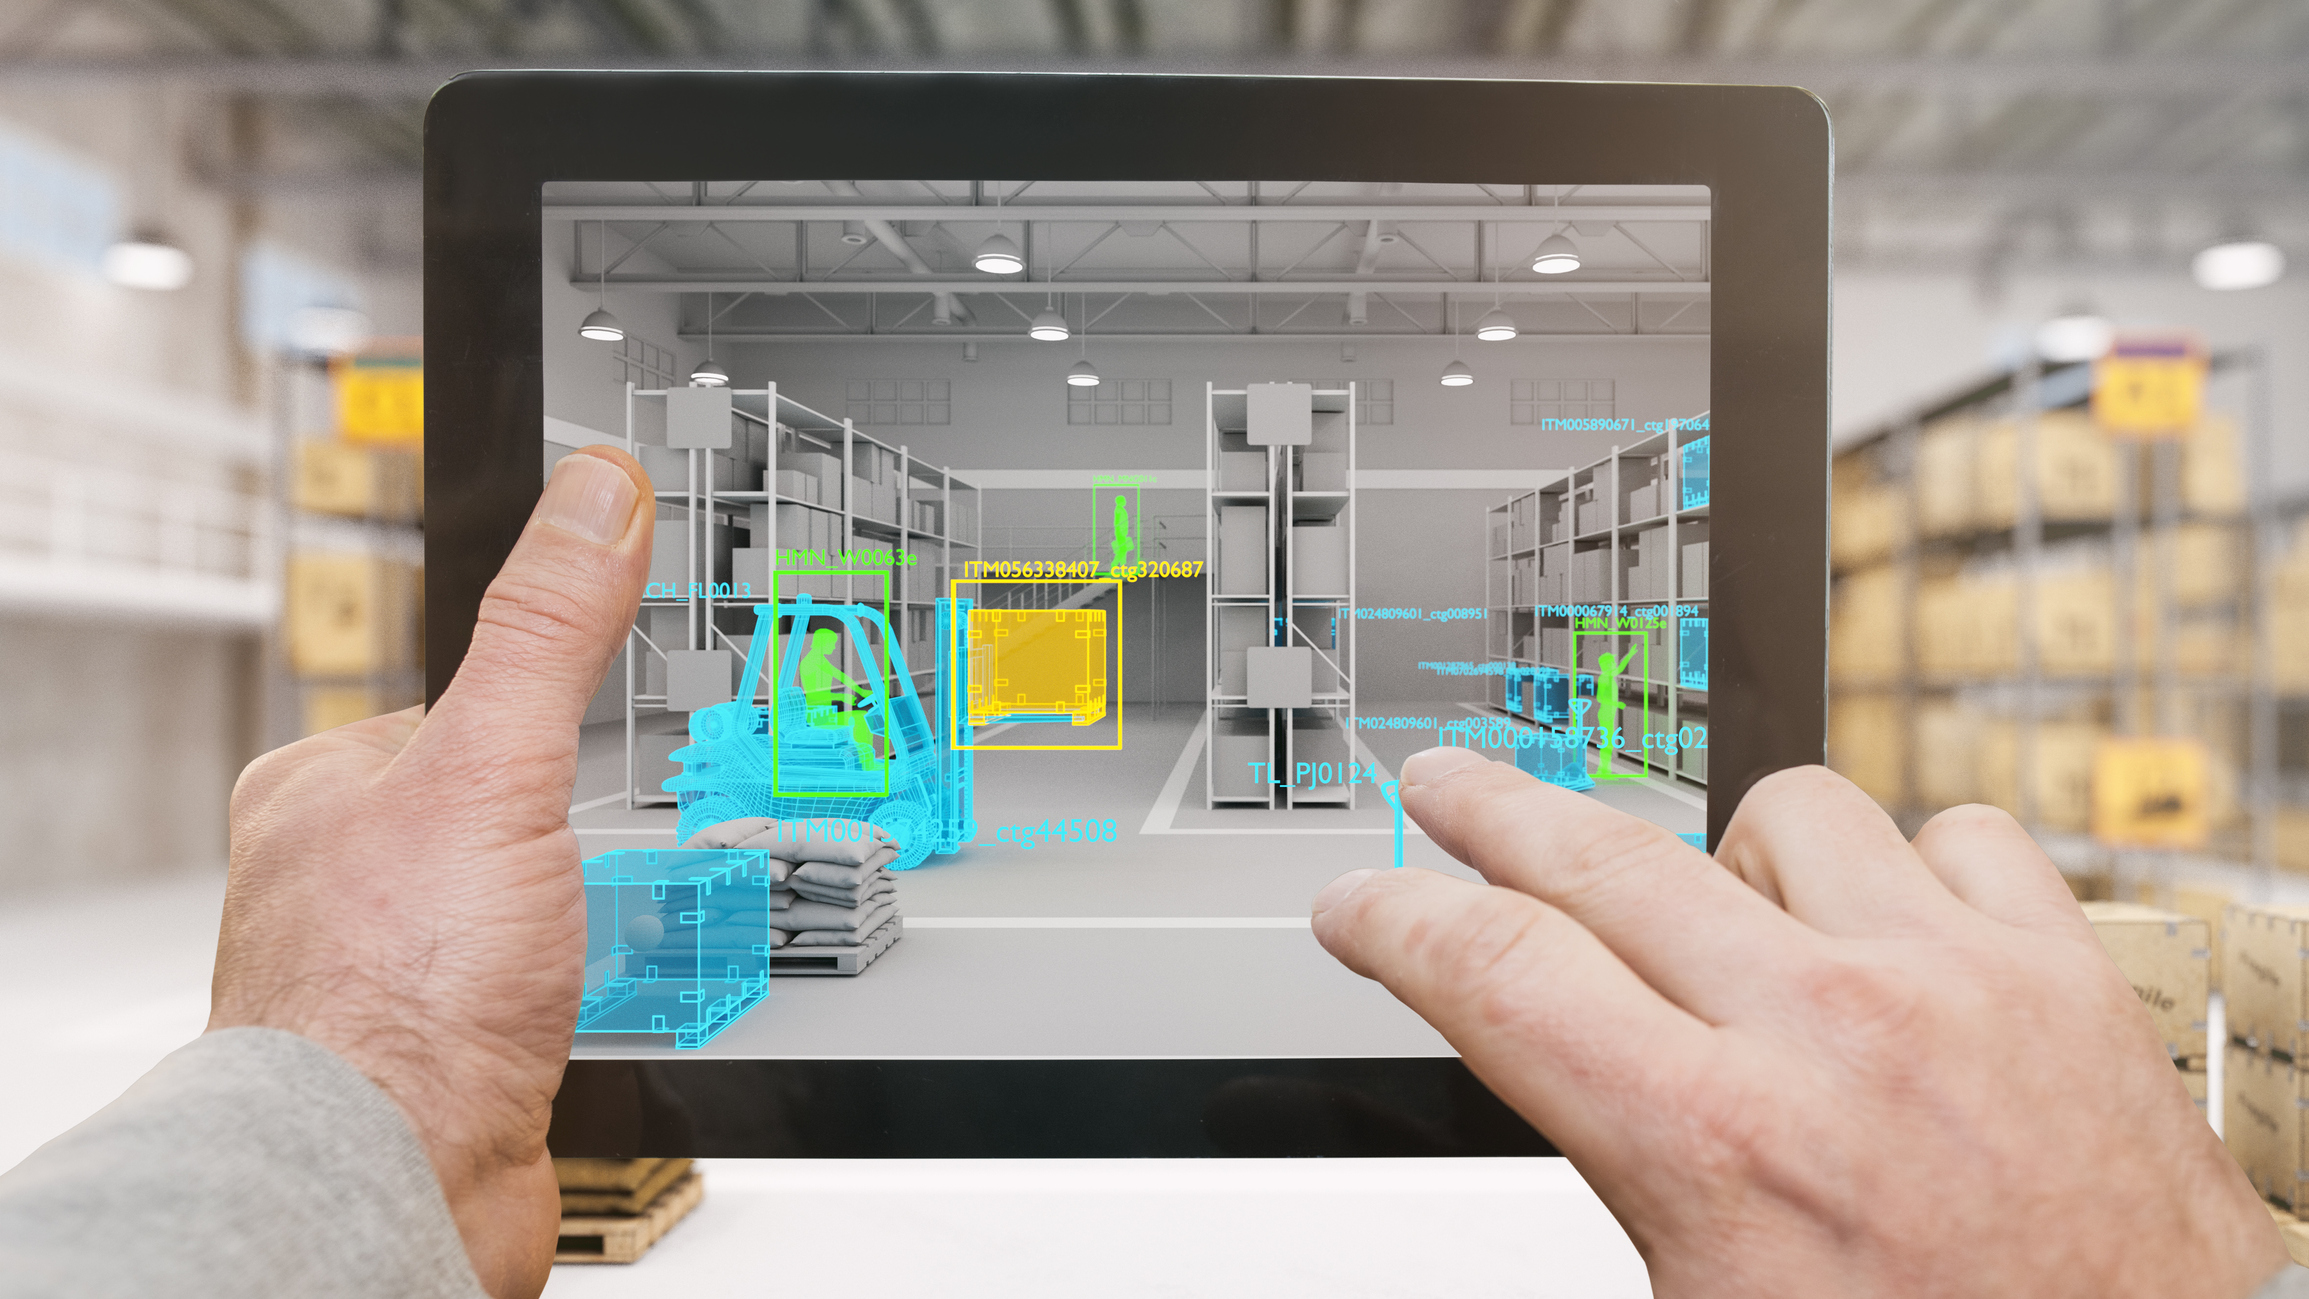 Future Focus: Immersive Learning Set to Transform Corporate Training 